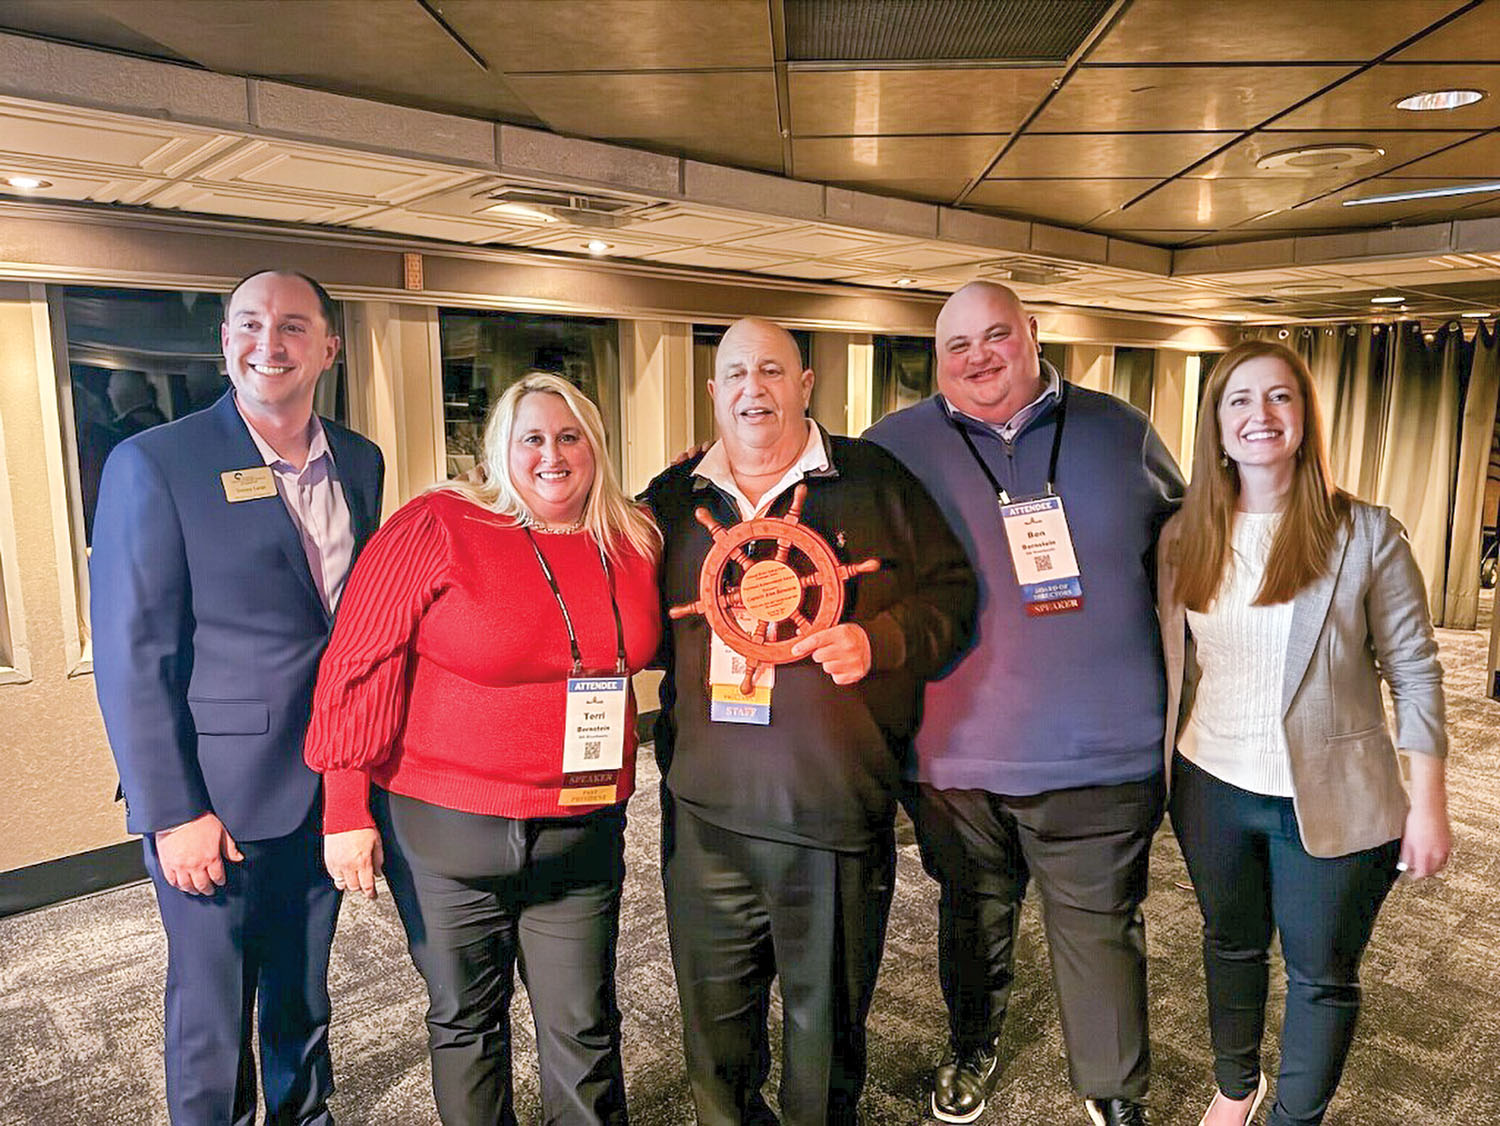 Capt. Alan Bernstein of BB Riverboats received a 2023 Achievement Award from the National Rivers Hall of Fame on January 26 at the Passenger Vessel Association conference in Portland, Ore. Pictured are (left to right), Tommy Lange, Terri Bernstein, Alan Bernstein, Ben Bernstein and Wendy Scardino. (Photo courtesy of BB Riverboats)